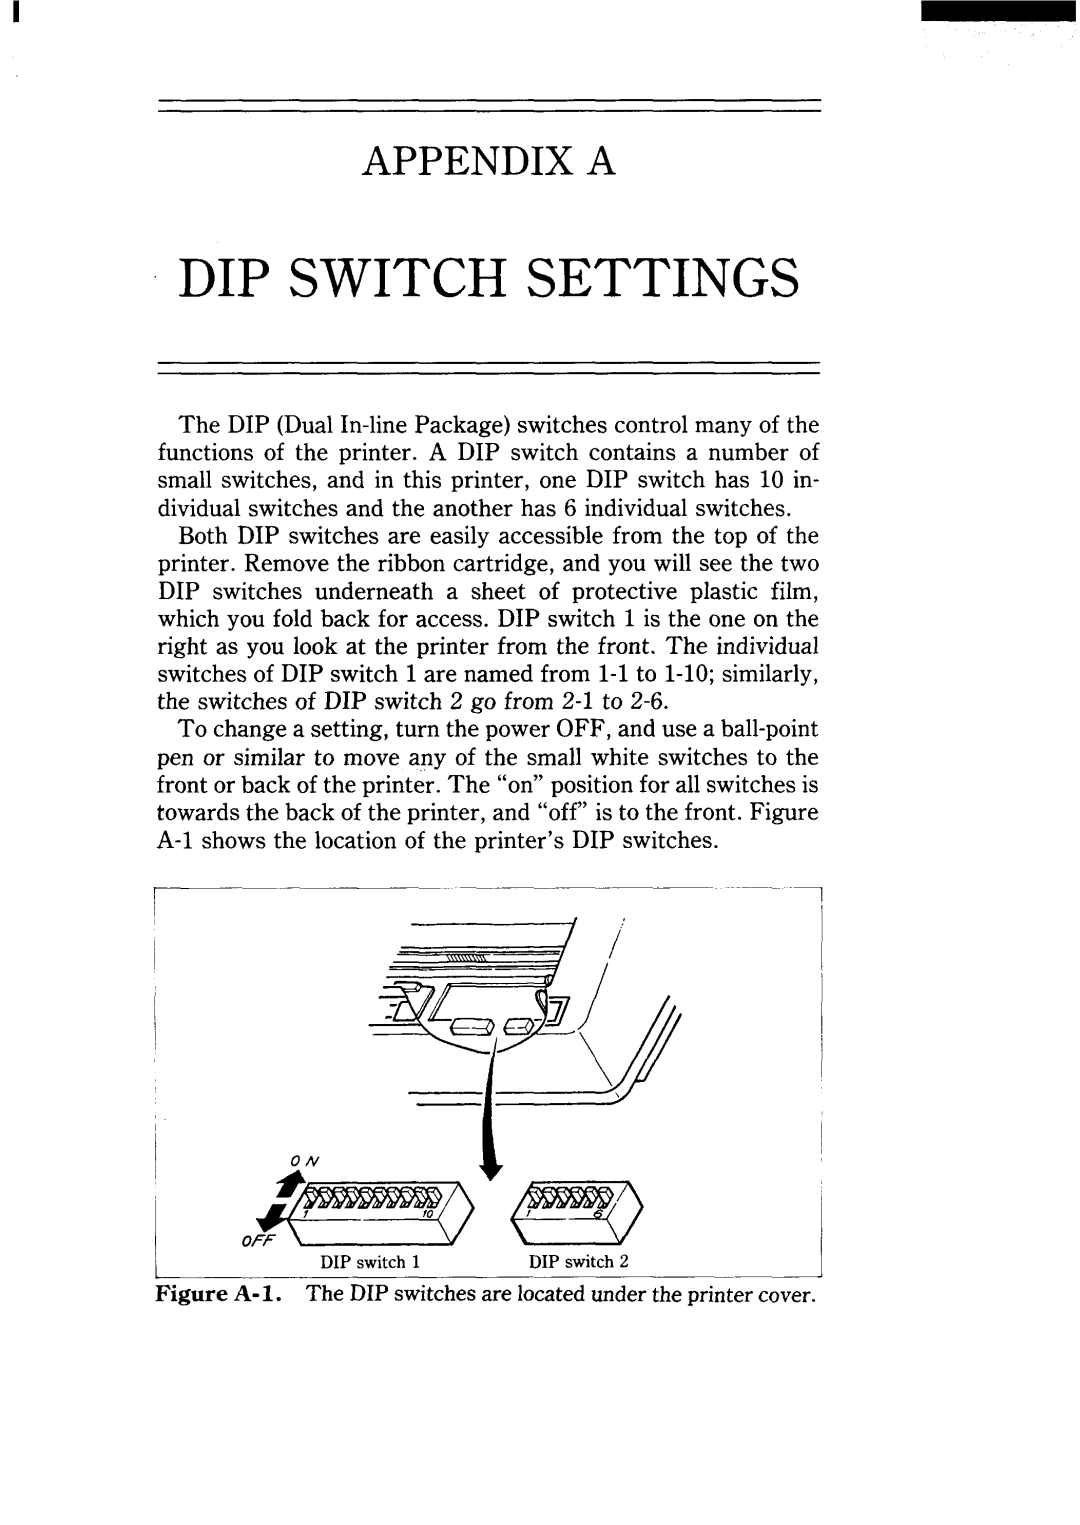 Star Micronics NX-15 user manual Dip Switch Settings, Appendix A, ~ 1 Y/ . -$ 